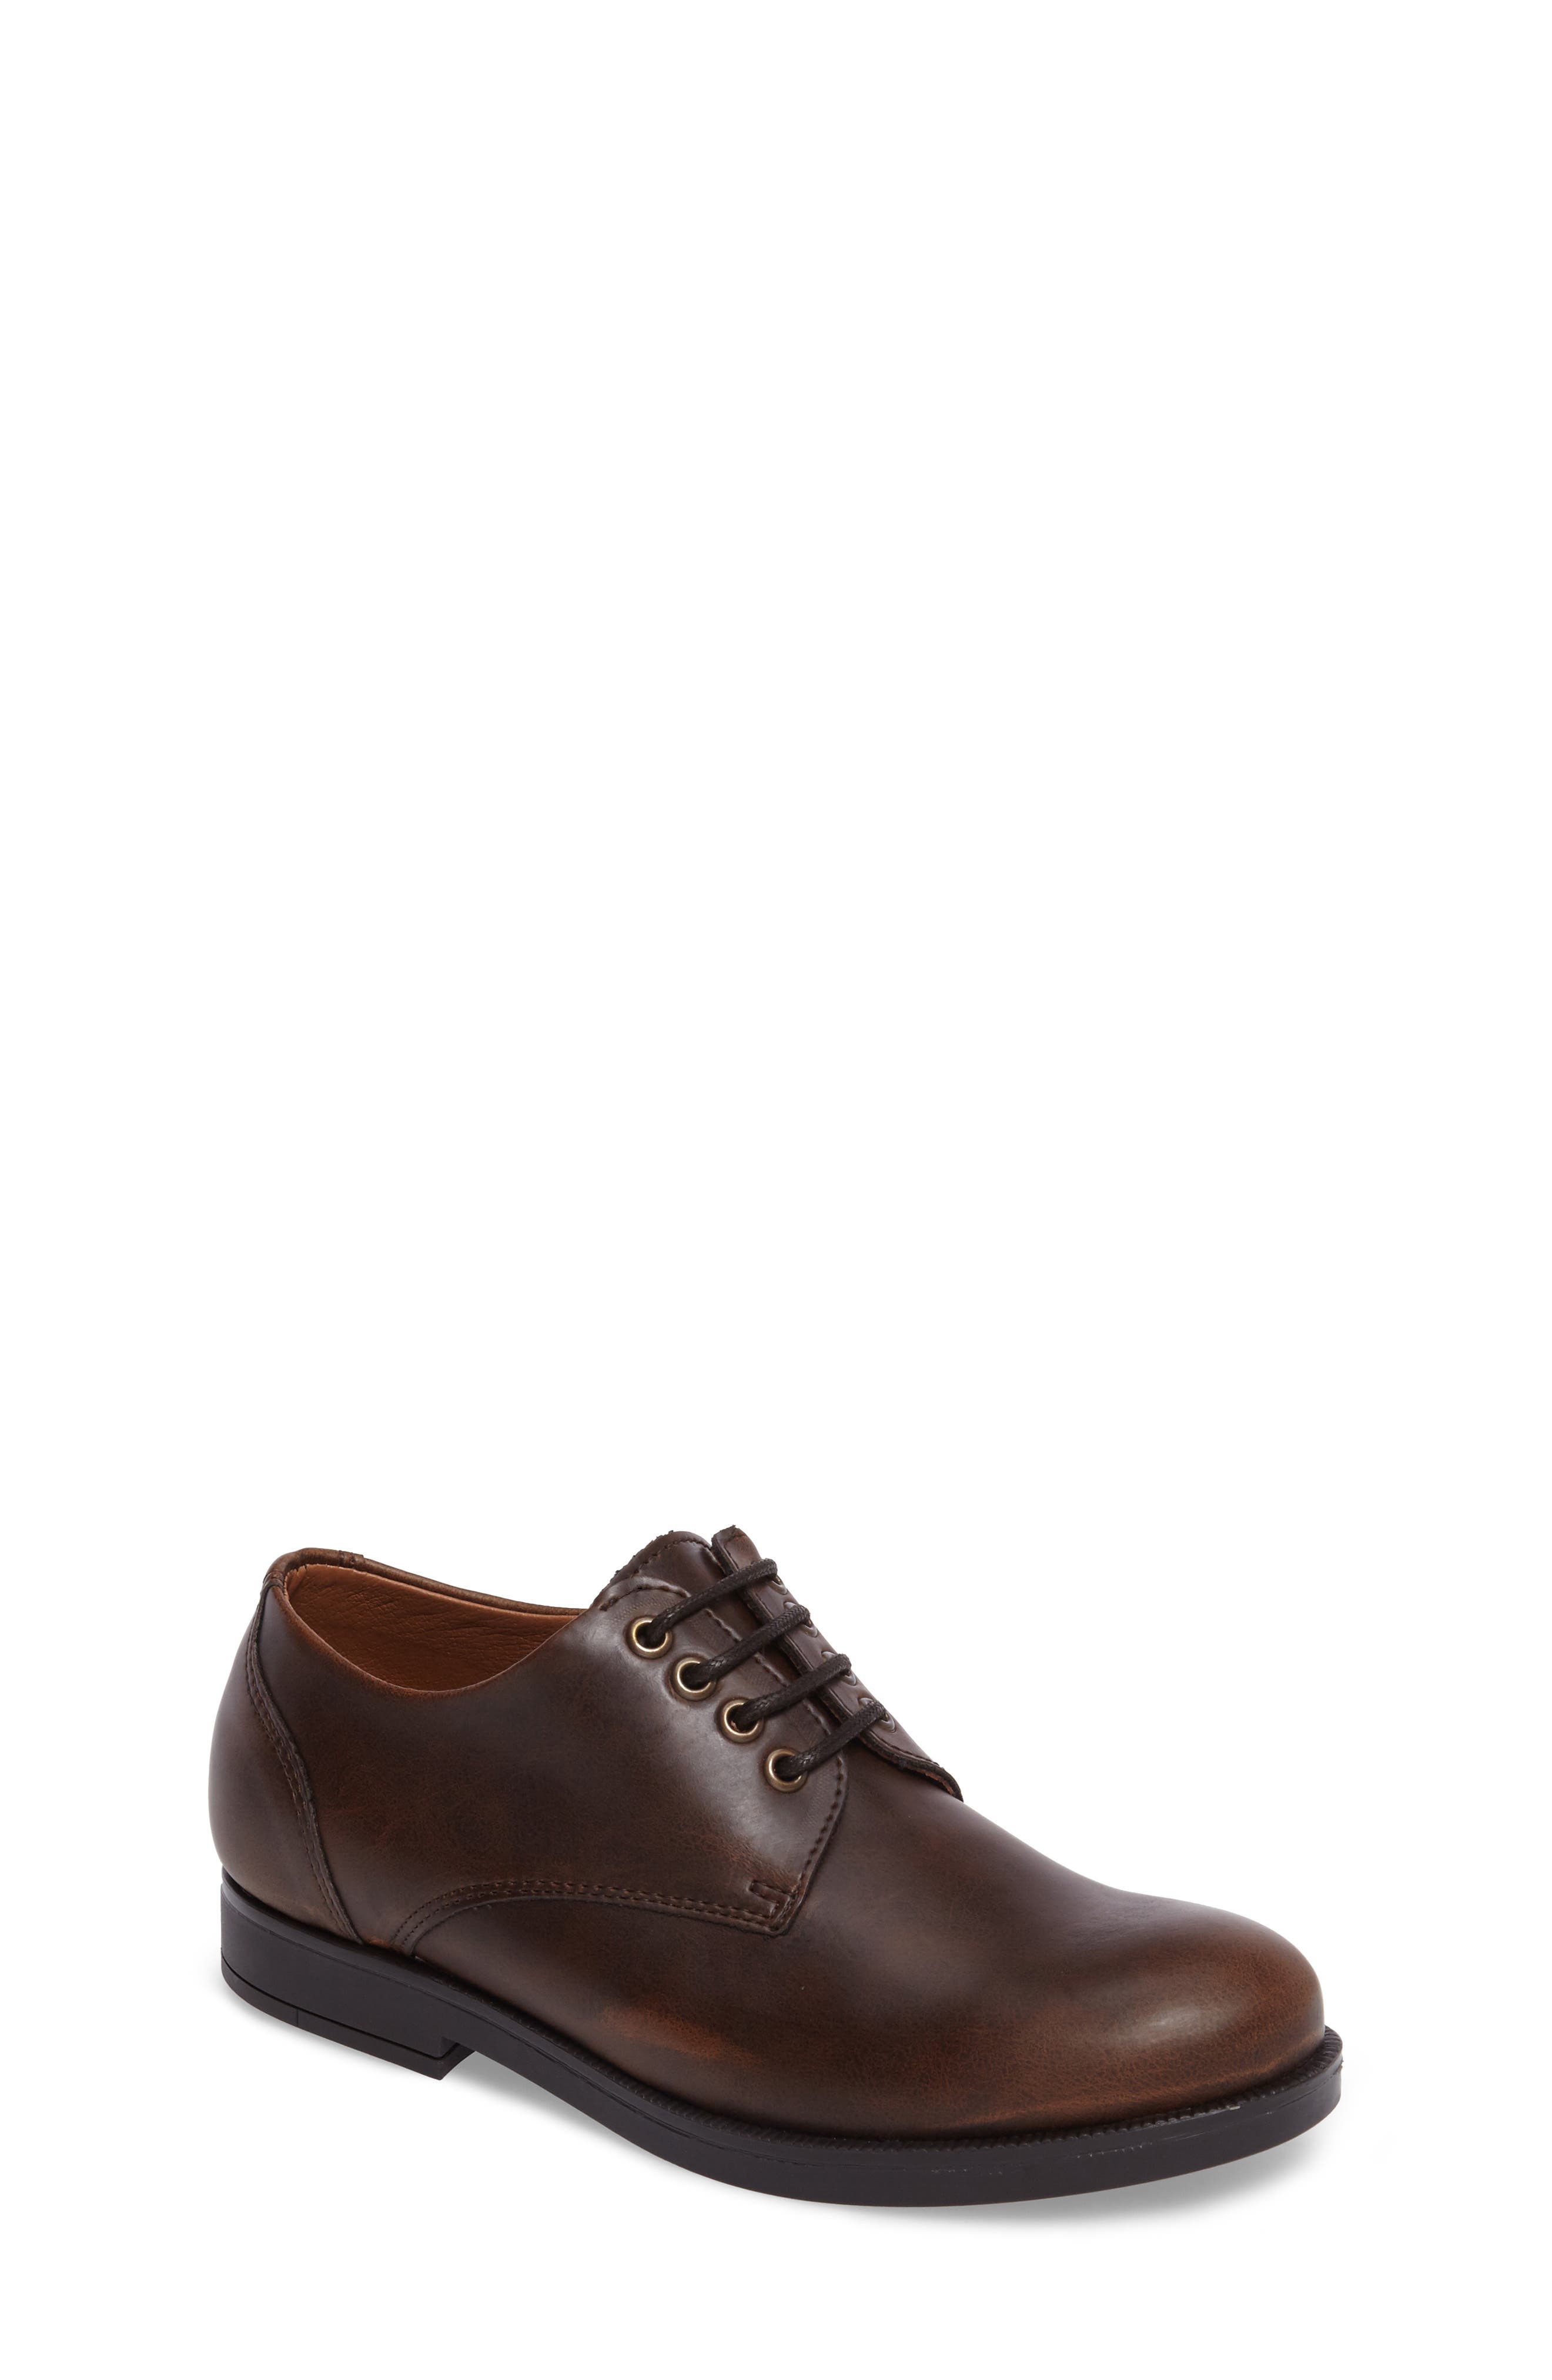 UPC 190937165825 product image for Boy's Vince Camuto Kalb Plain Toe Oxford, Size 12.5 M - Brown | upcitemdb.com